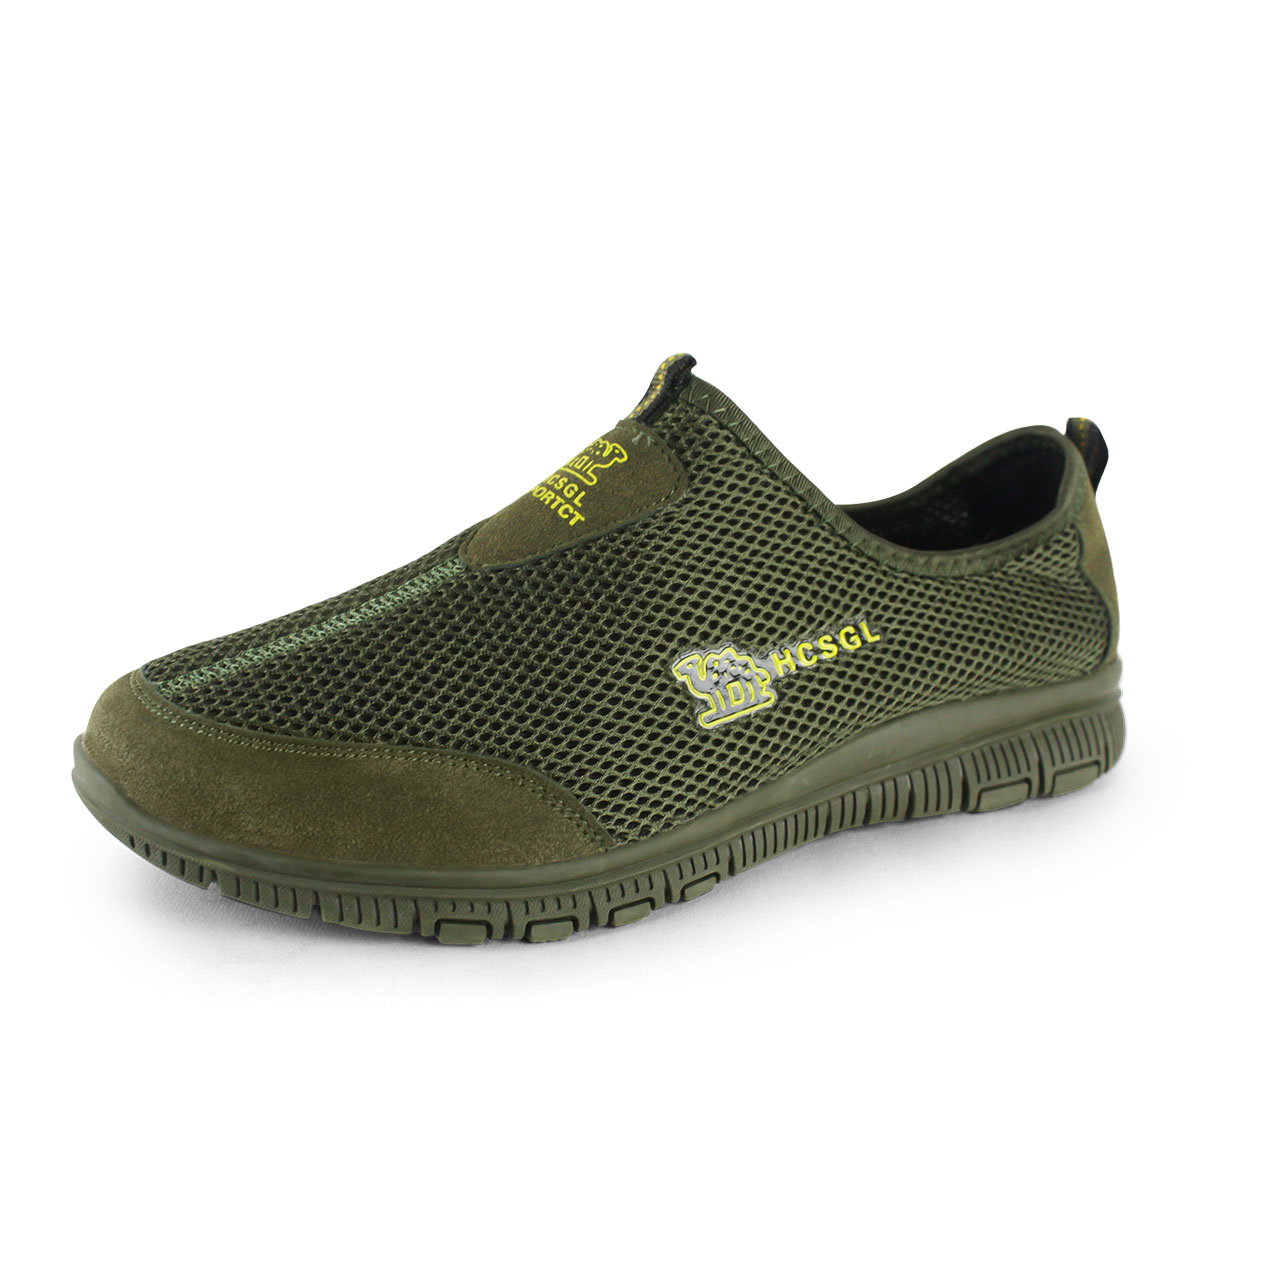 Slip-On Leather In Fashion Sneakers For Men Casual Green Shoes